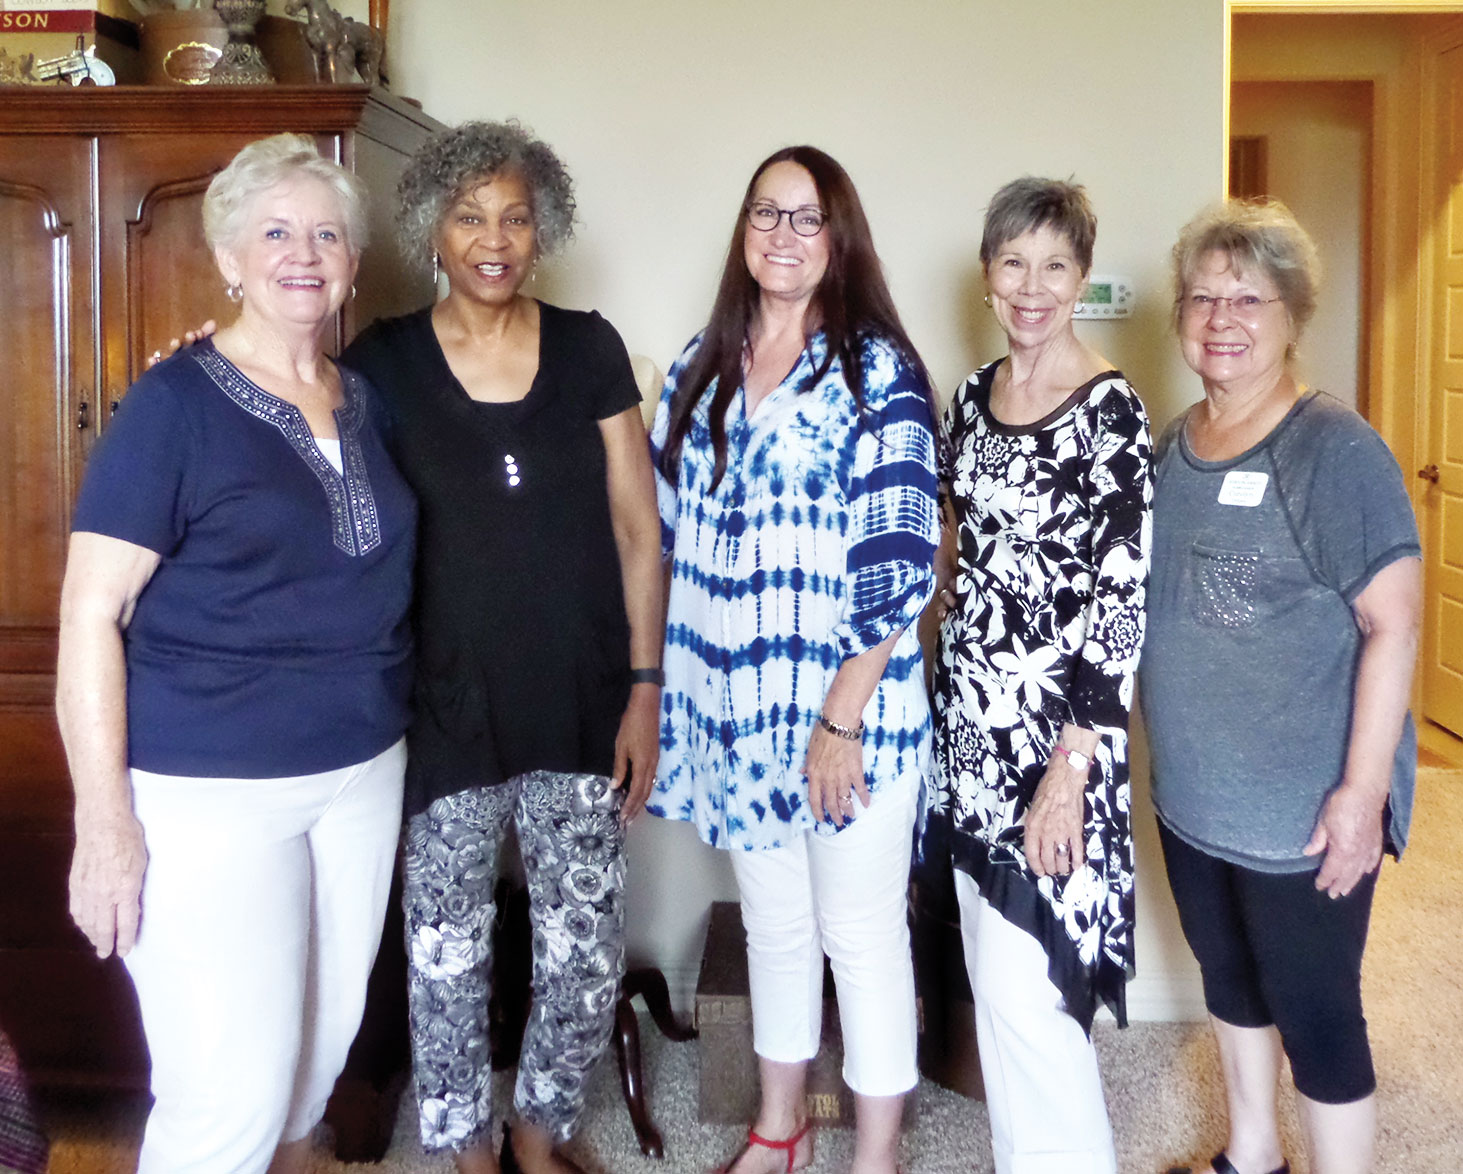 Dawn Schiegg, Judie Smothers, Lori Humphries, Carolyn Detjen and Trinka Taylor enjoy a morning together at Happy Potters annual meeting.